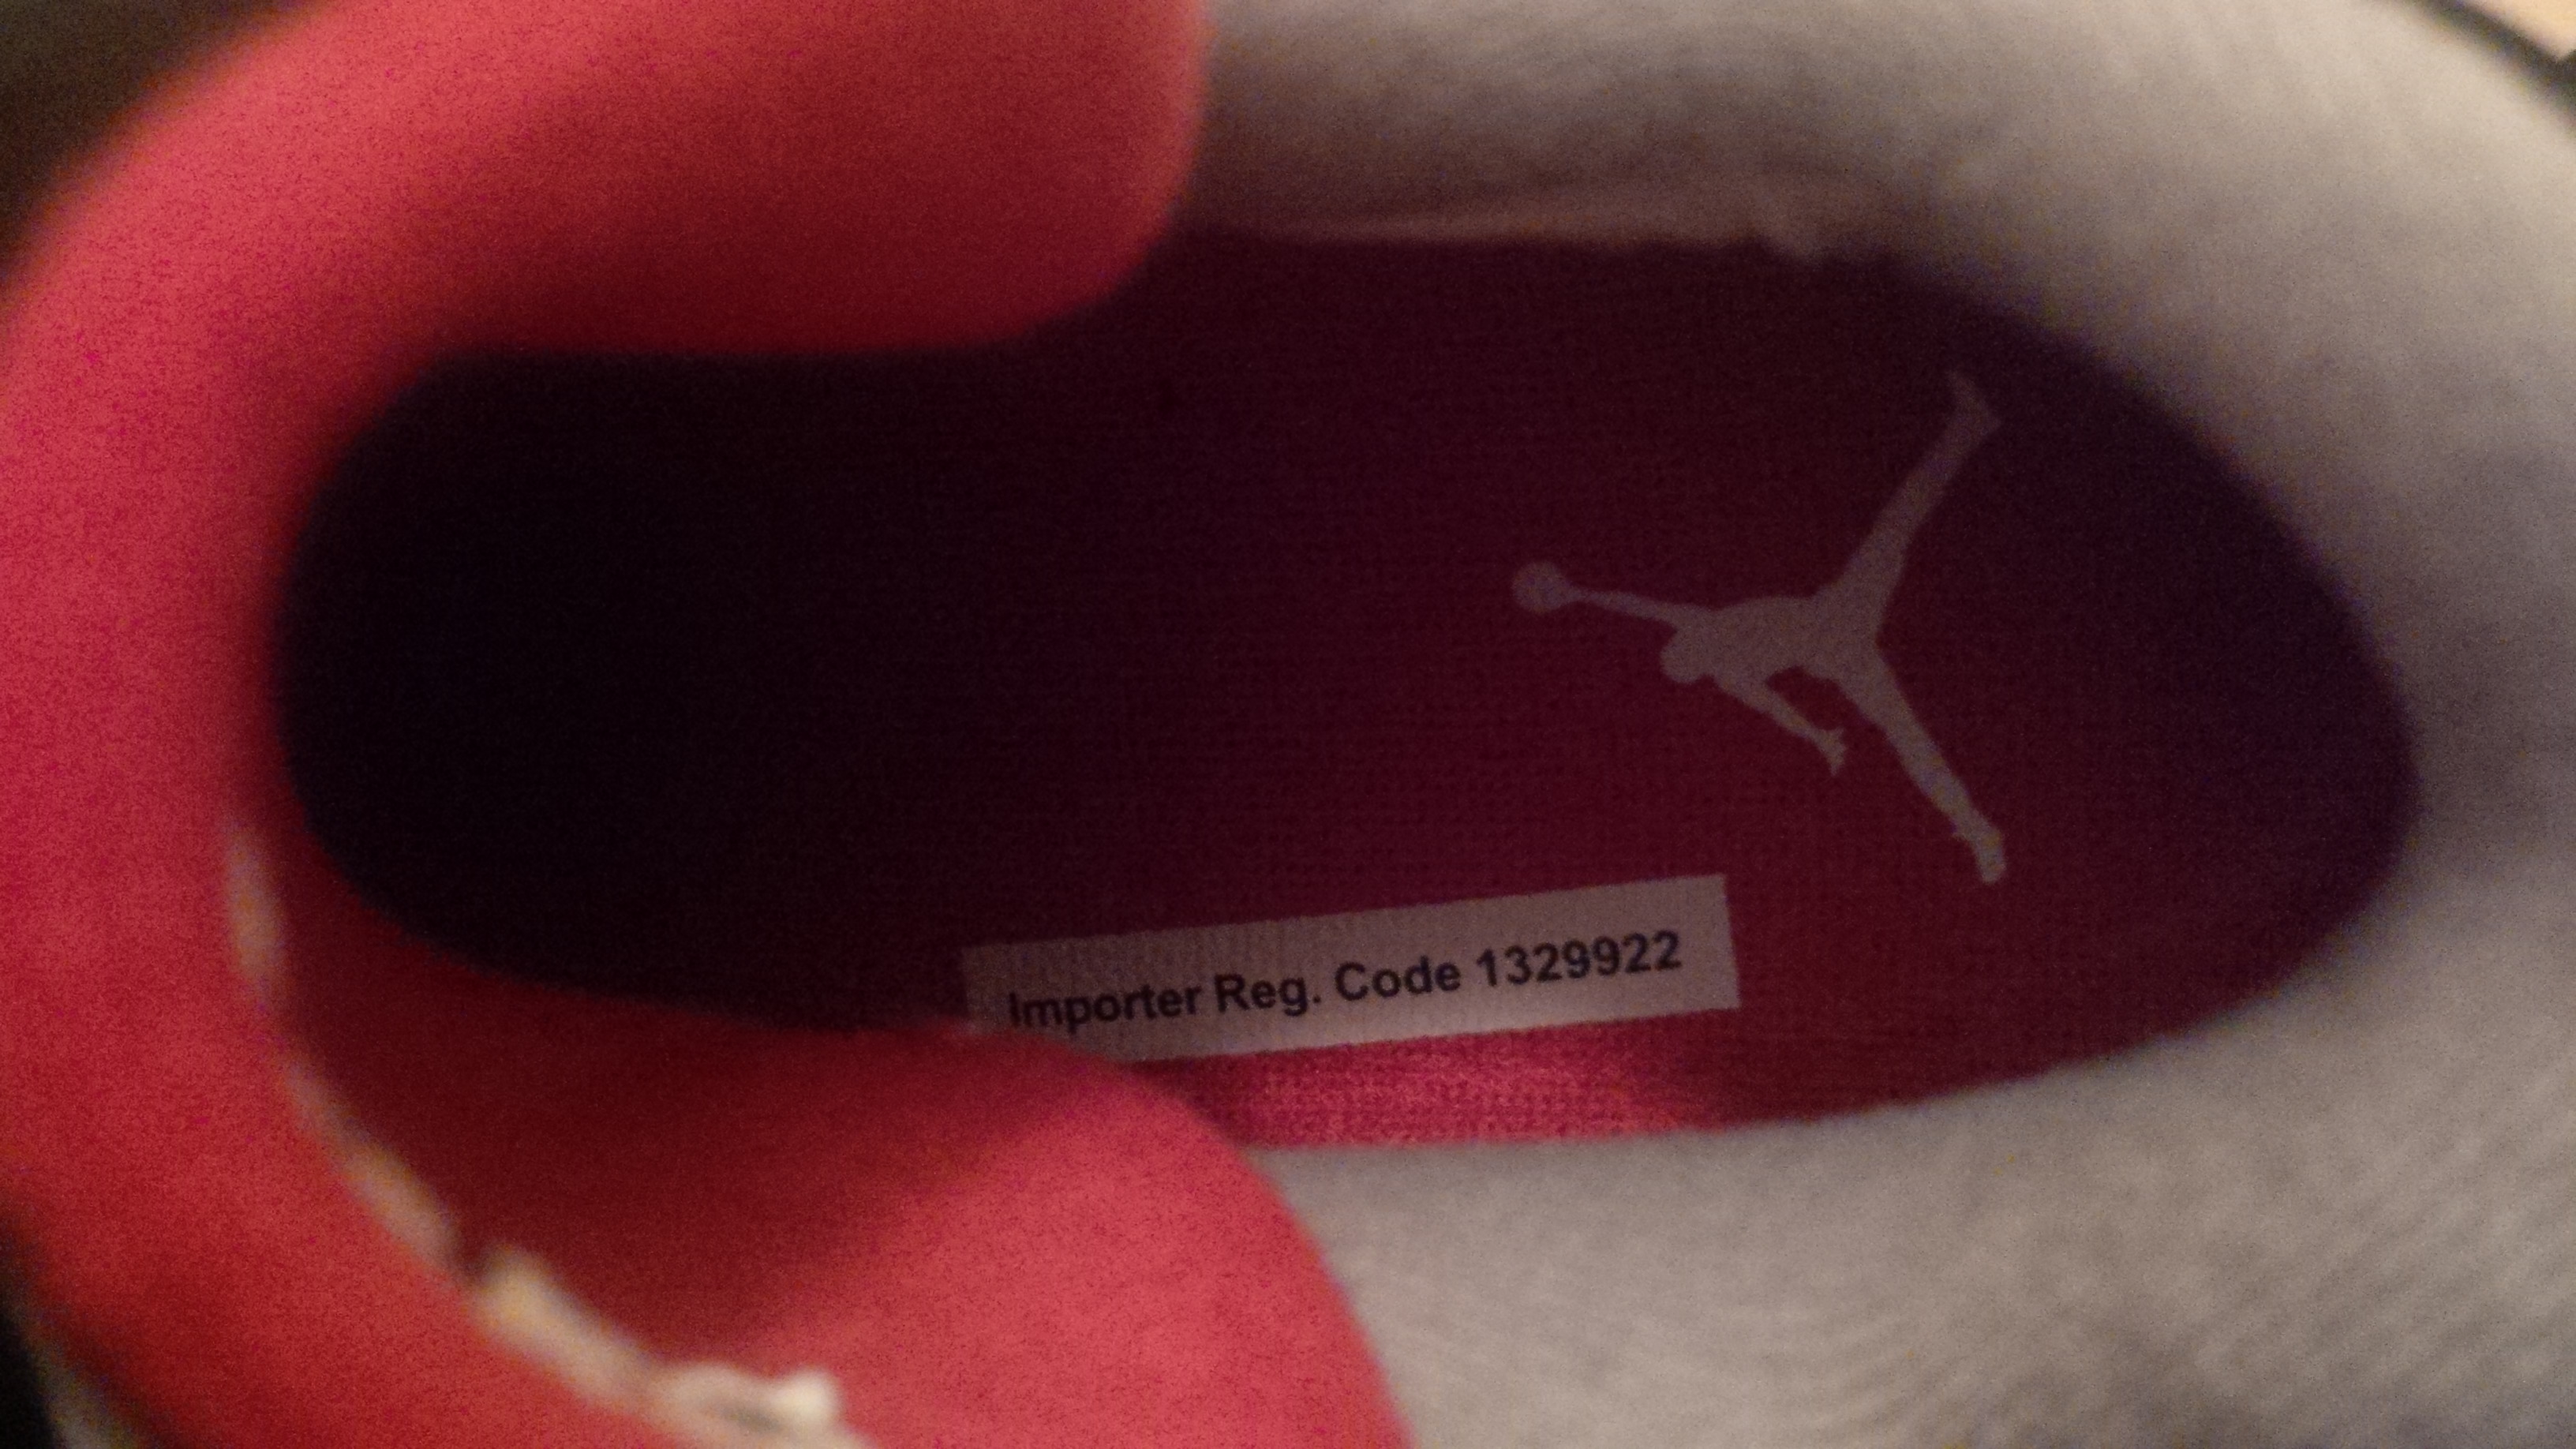 Tags on insole of left sneaker